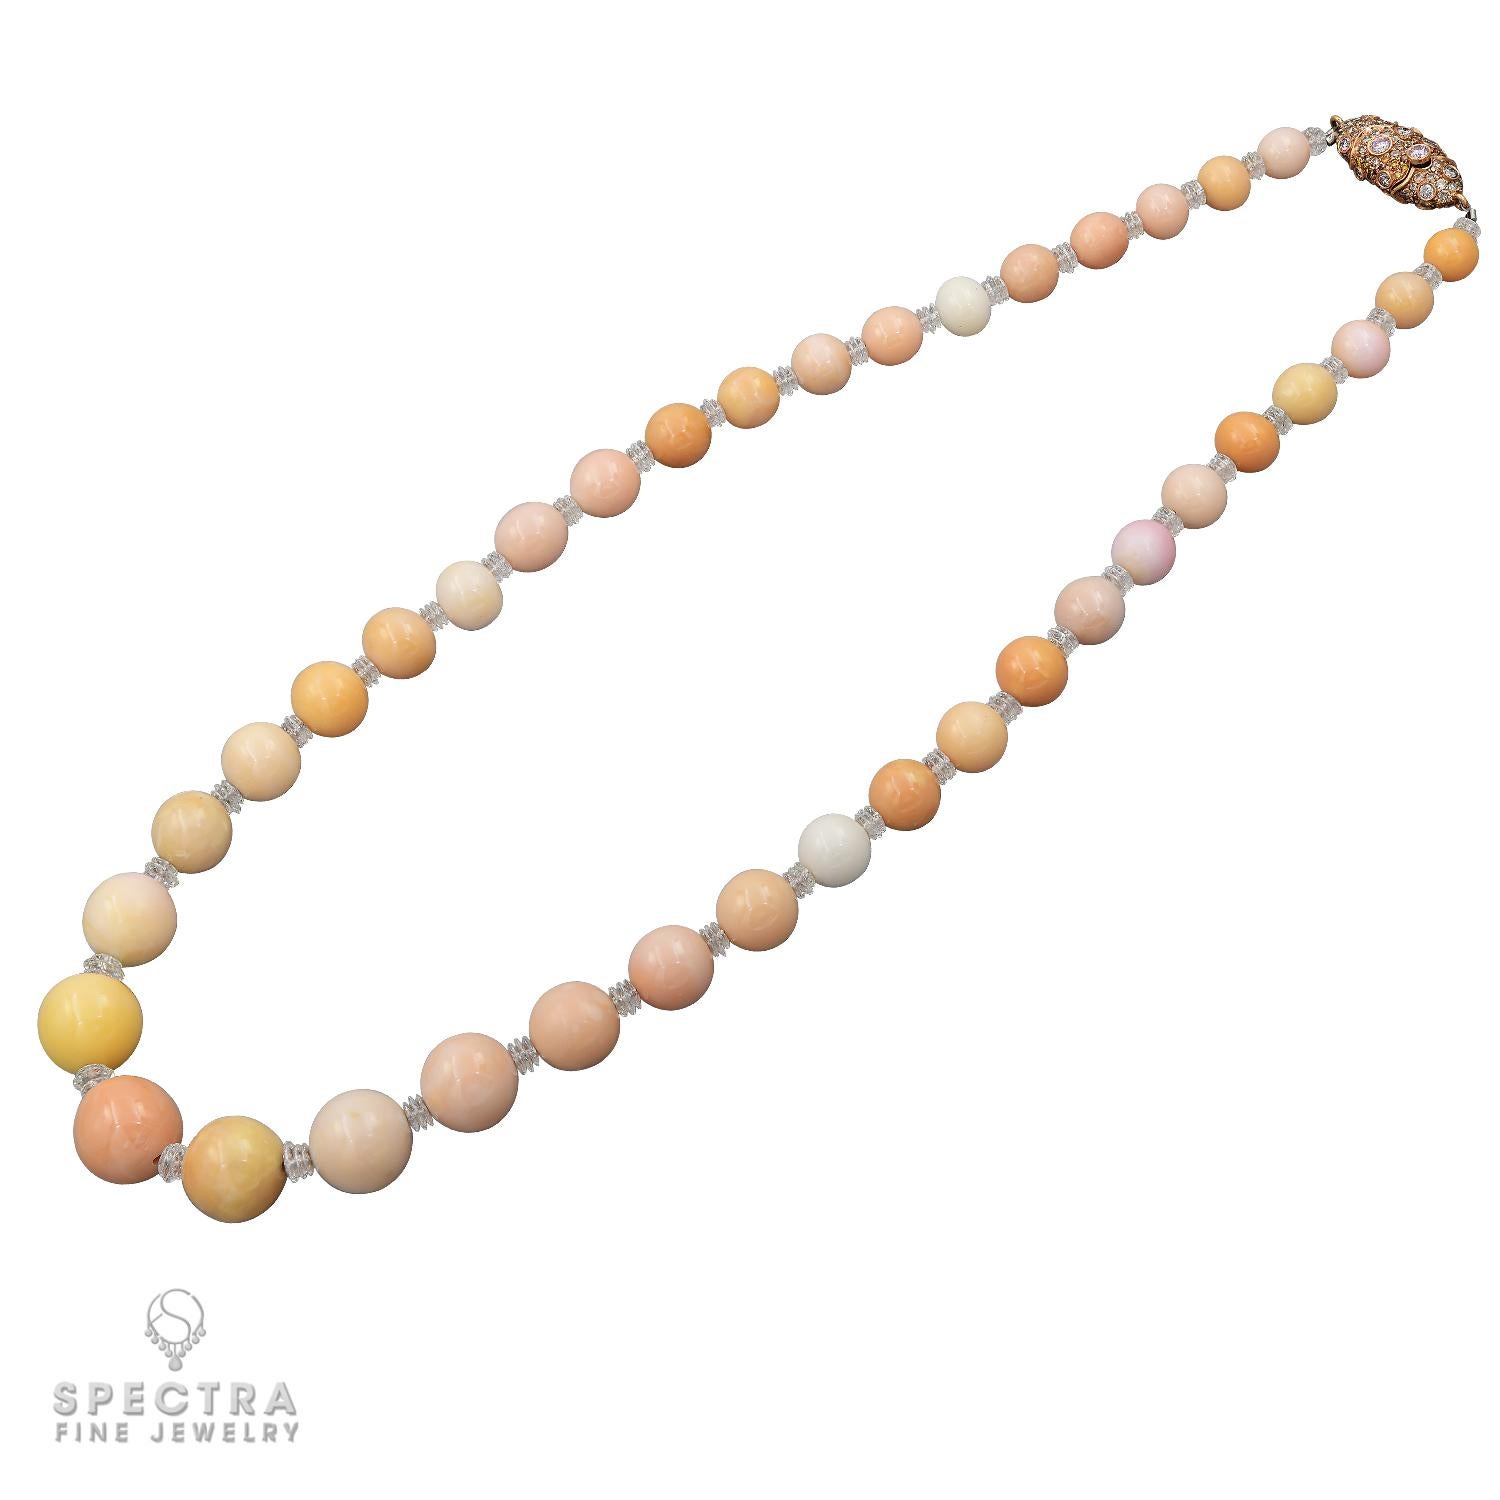 Conch pearls (pronounced KONK) are among the rarest and most valuable of all natural pearls. It has been estimated that approximately 15,000 conch must be harvested before a single pearl is found. An exceptional piece (pearls over 10 carats and